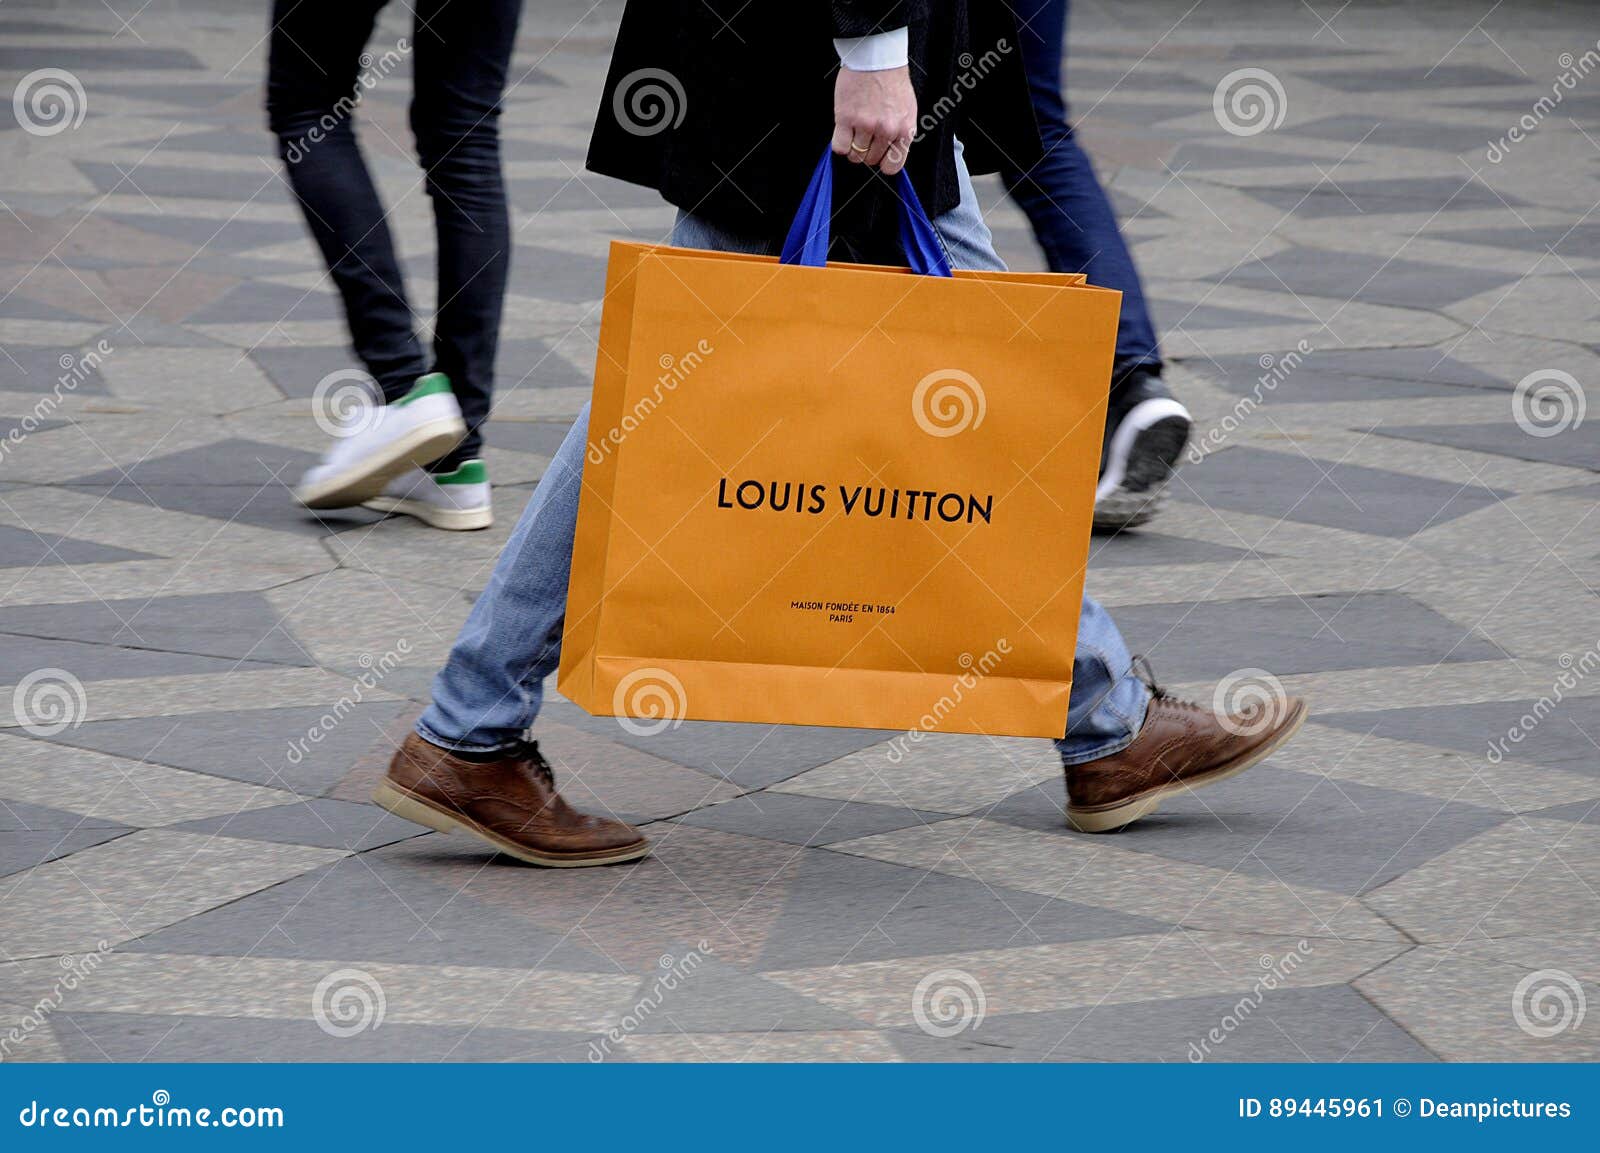 SHOPPERS with LOUIS VUITTON SHOPPING BAG Editorial Photo - Image